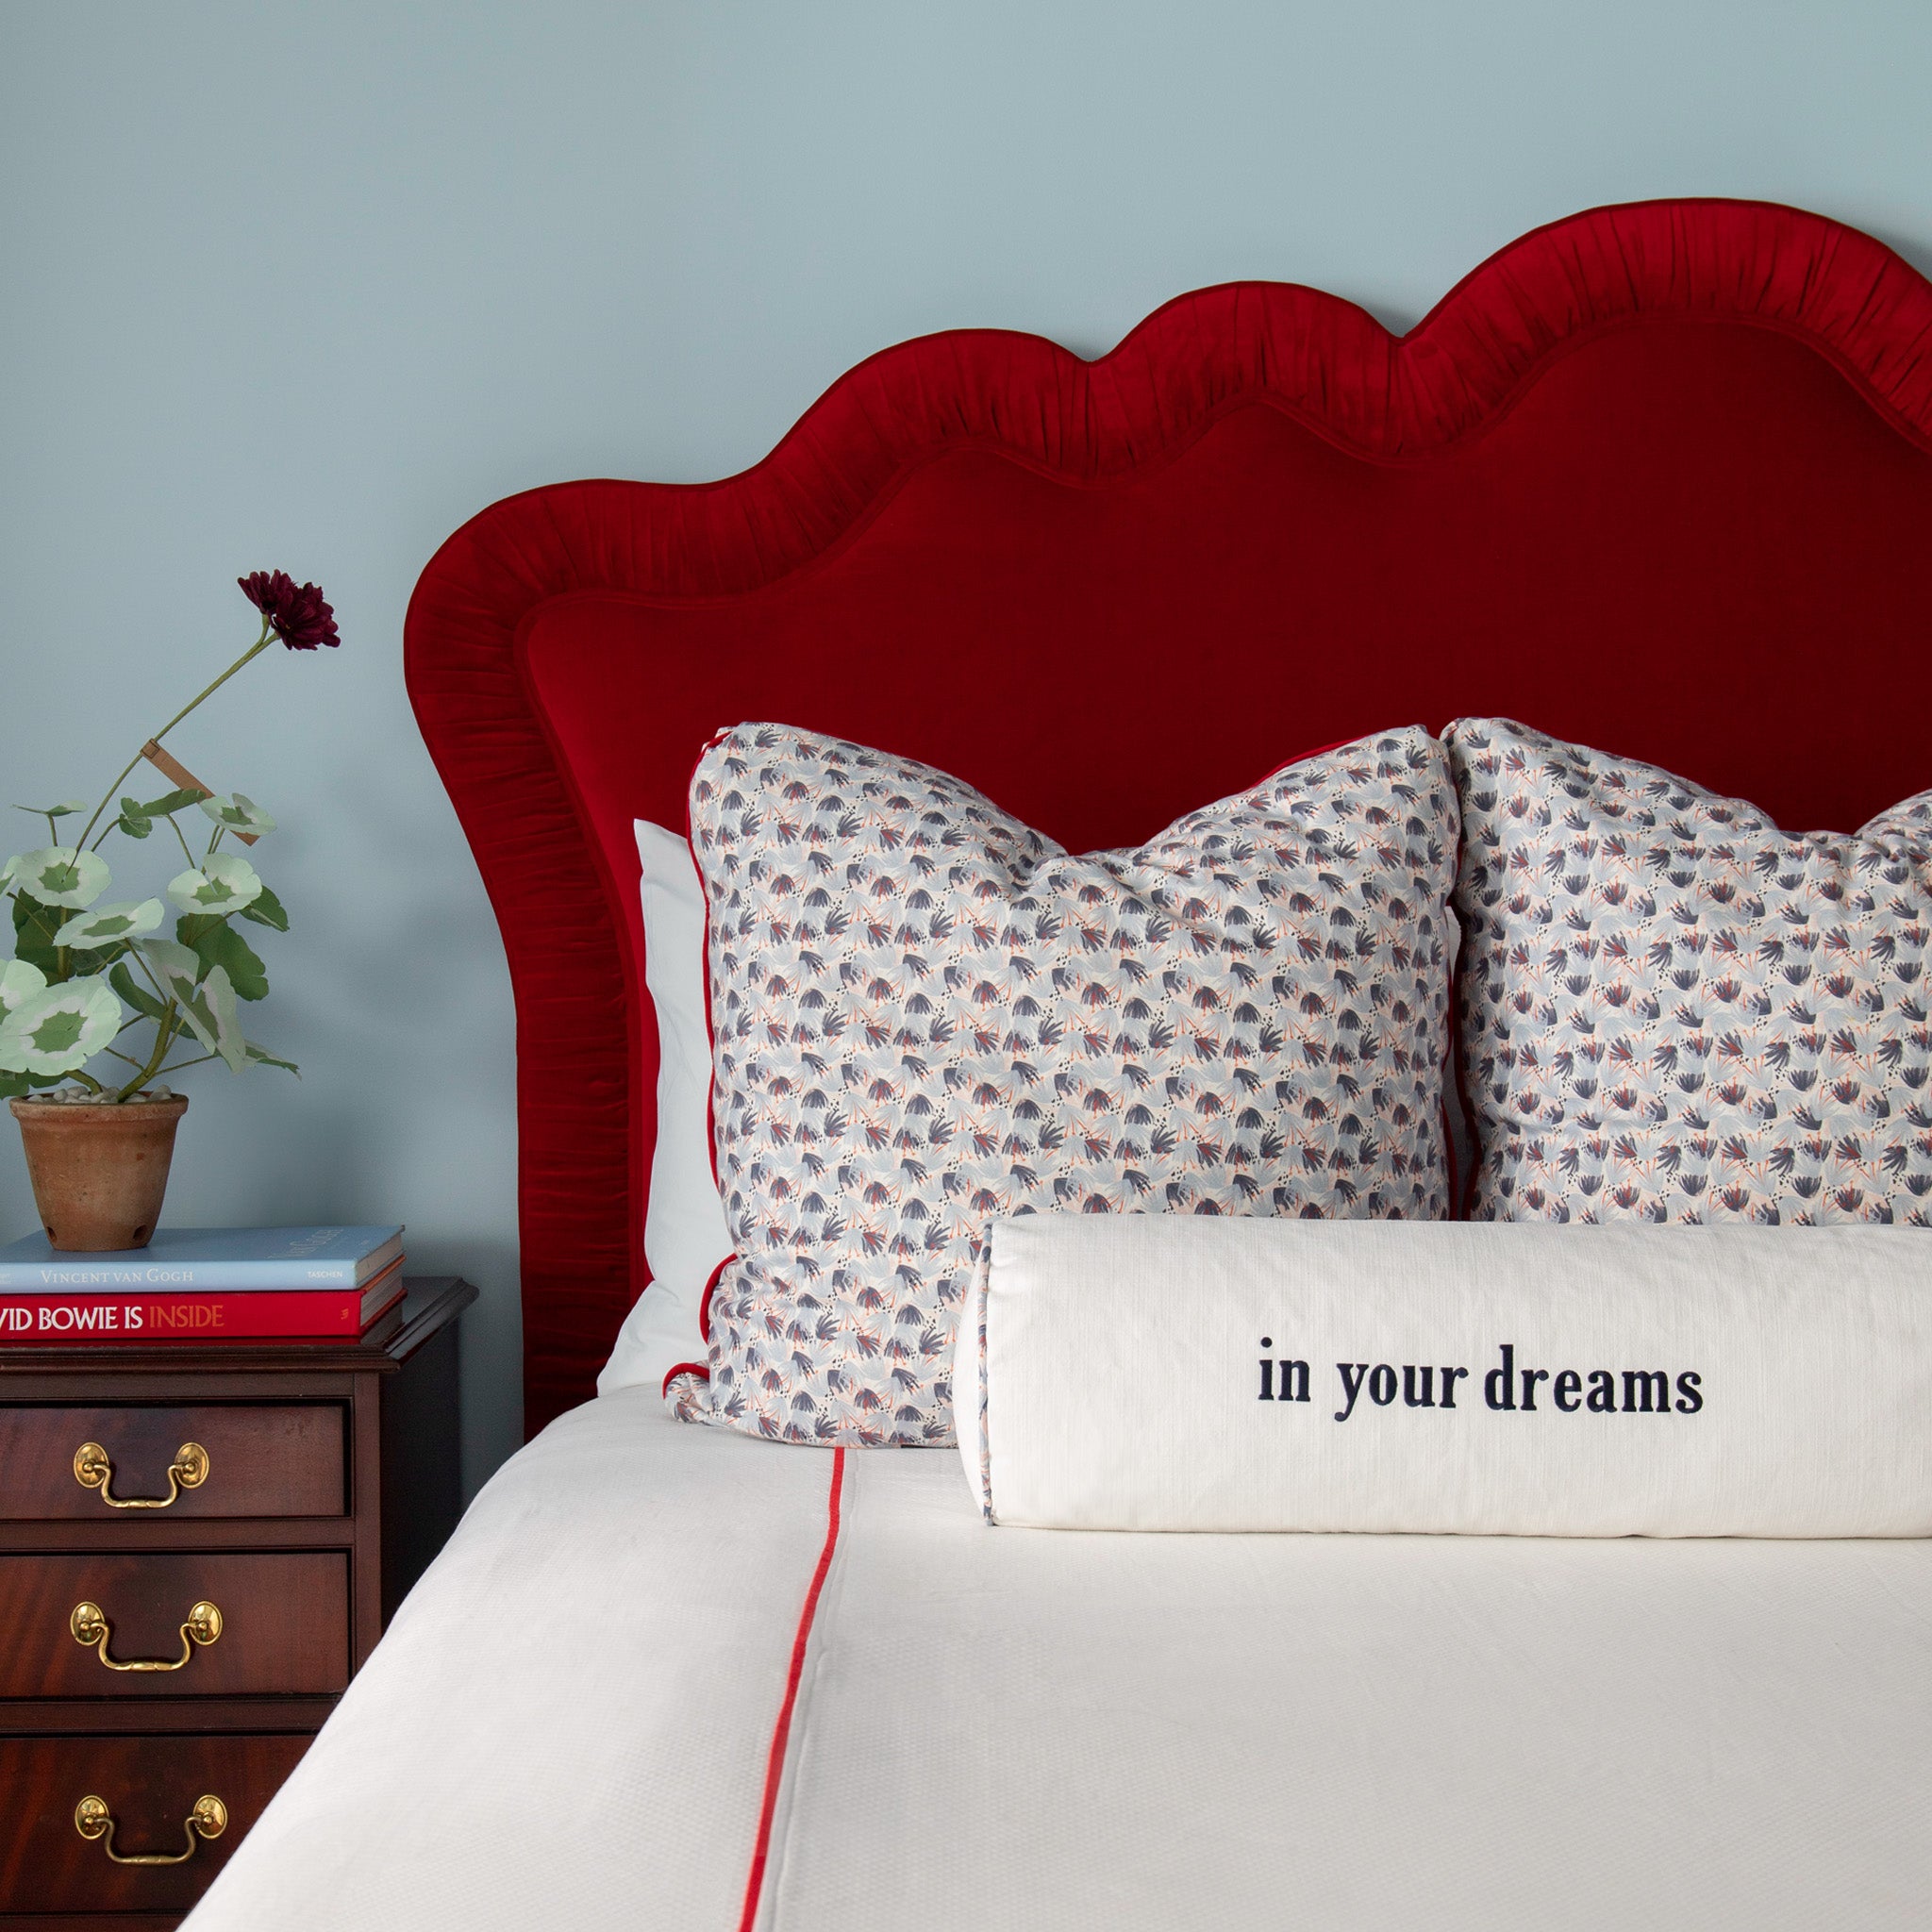 Close-up of bedroom styled with Red and Blue Printed Pillows and white cotton monogrammed bolster on White bed with red headboard next to a wooden nightstand with flowers in vase on top of stacked books